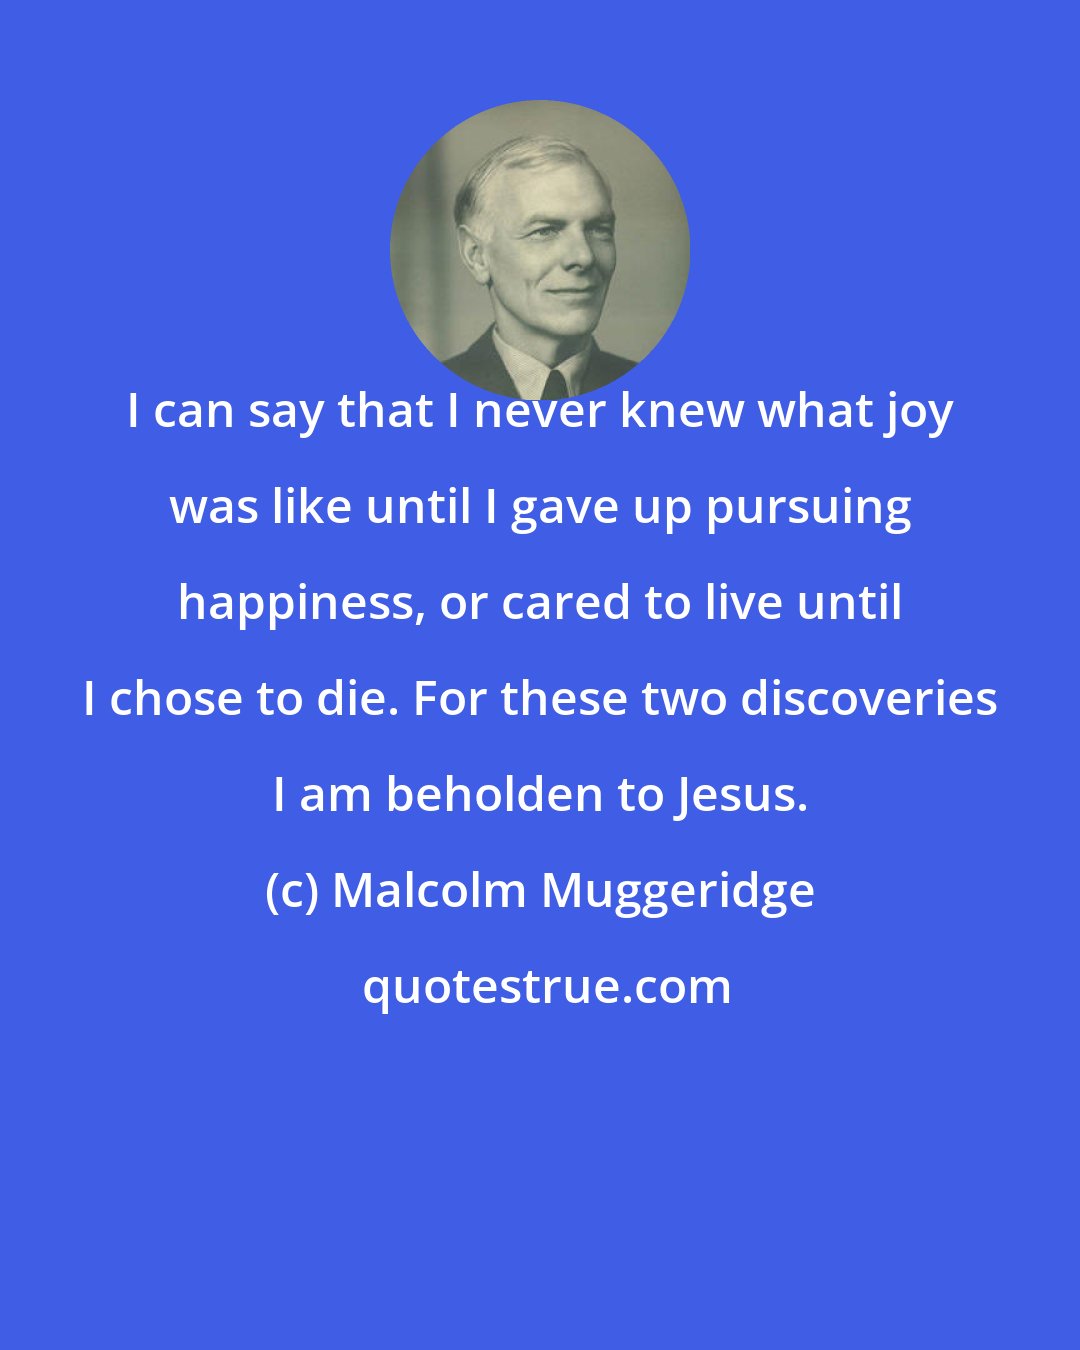 Malcolm Muggeridge: I can say that I never knew what joy was like until I gave up pursuing happiness, or cared to live until I chose to die. For these two discoveries I am beholden to Jesus.